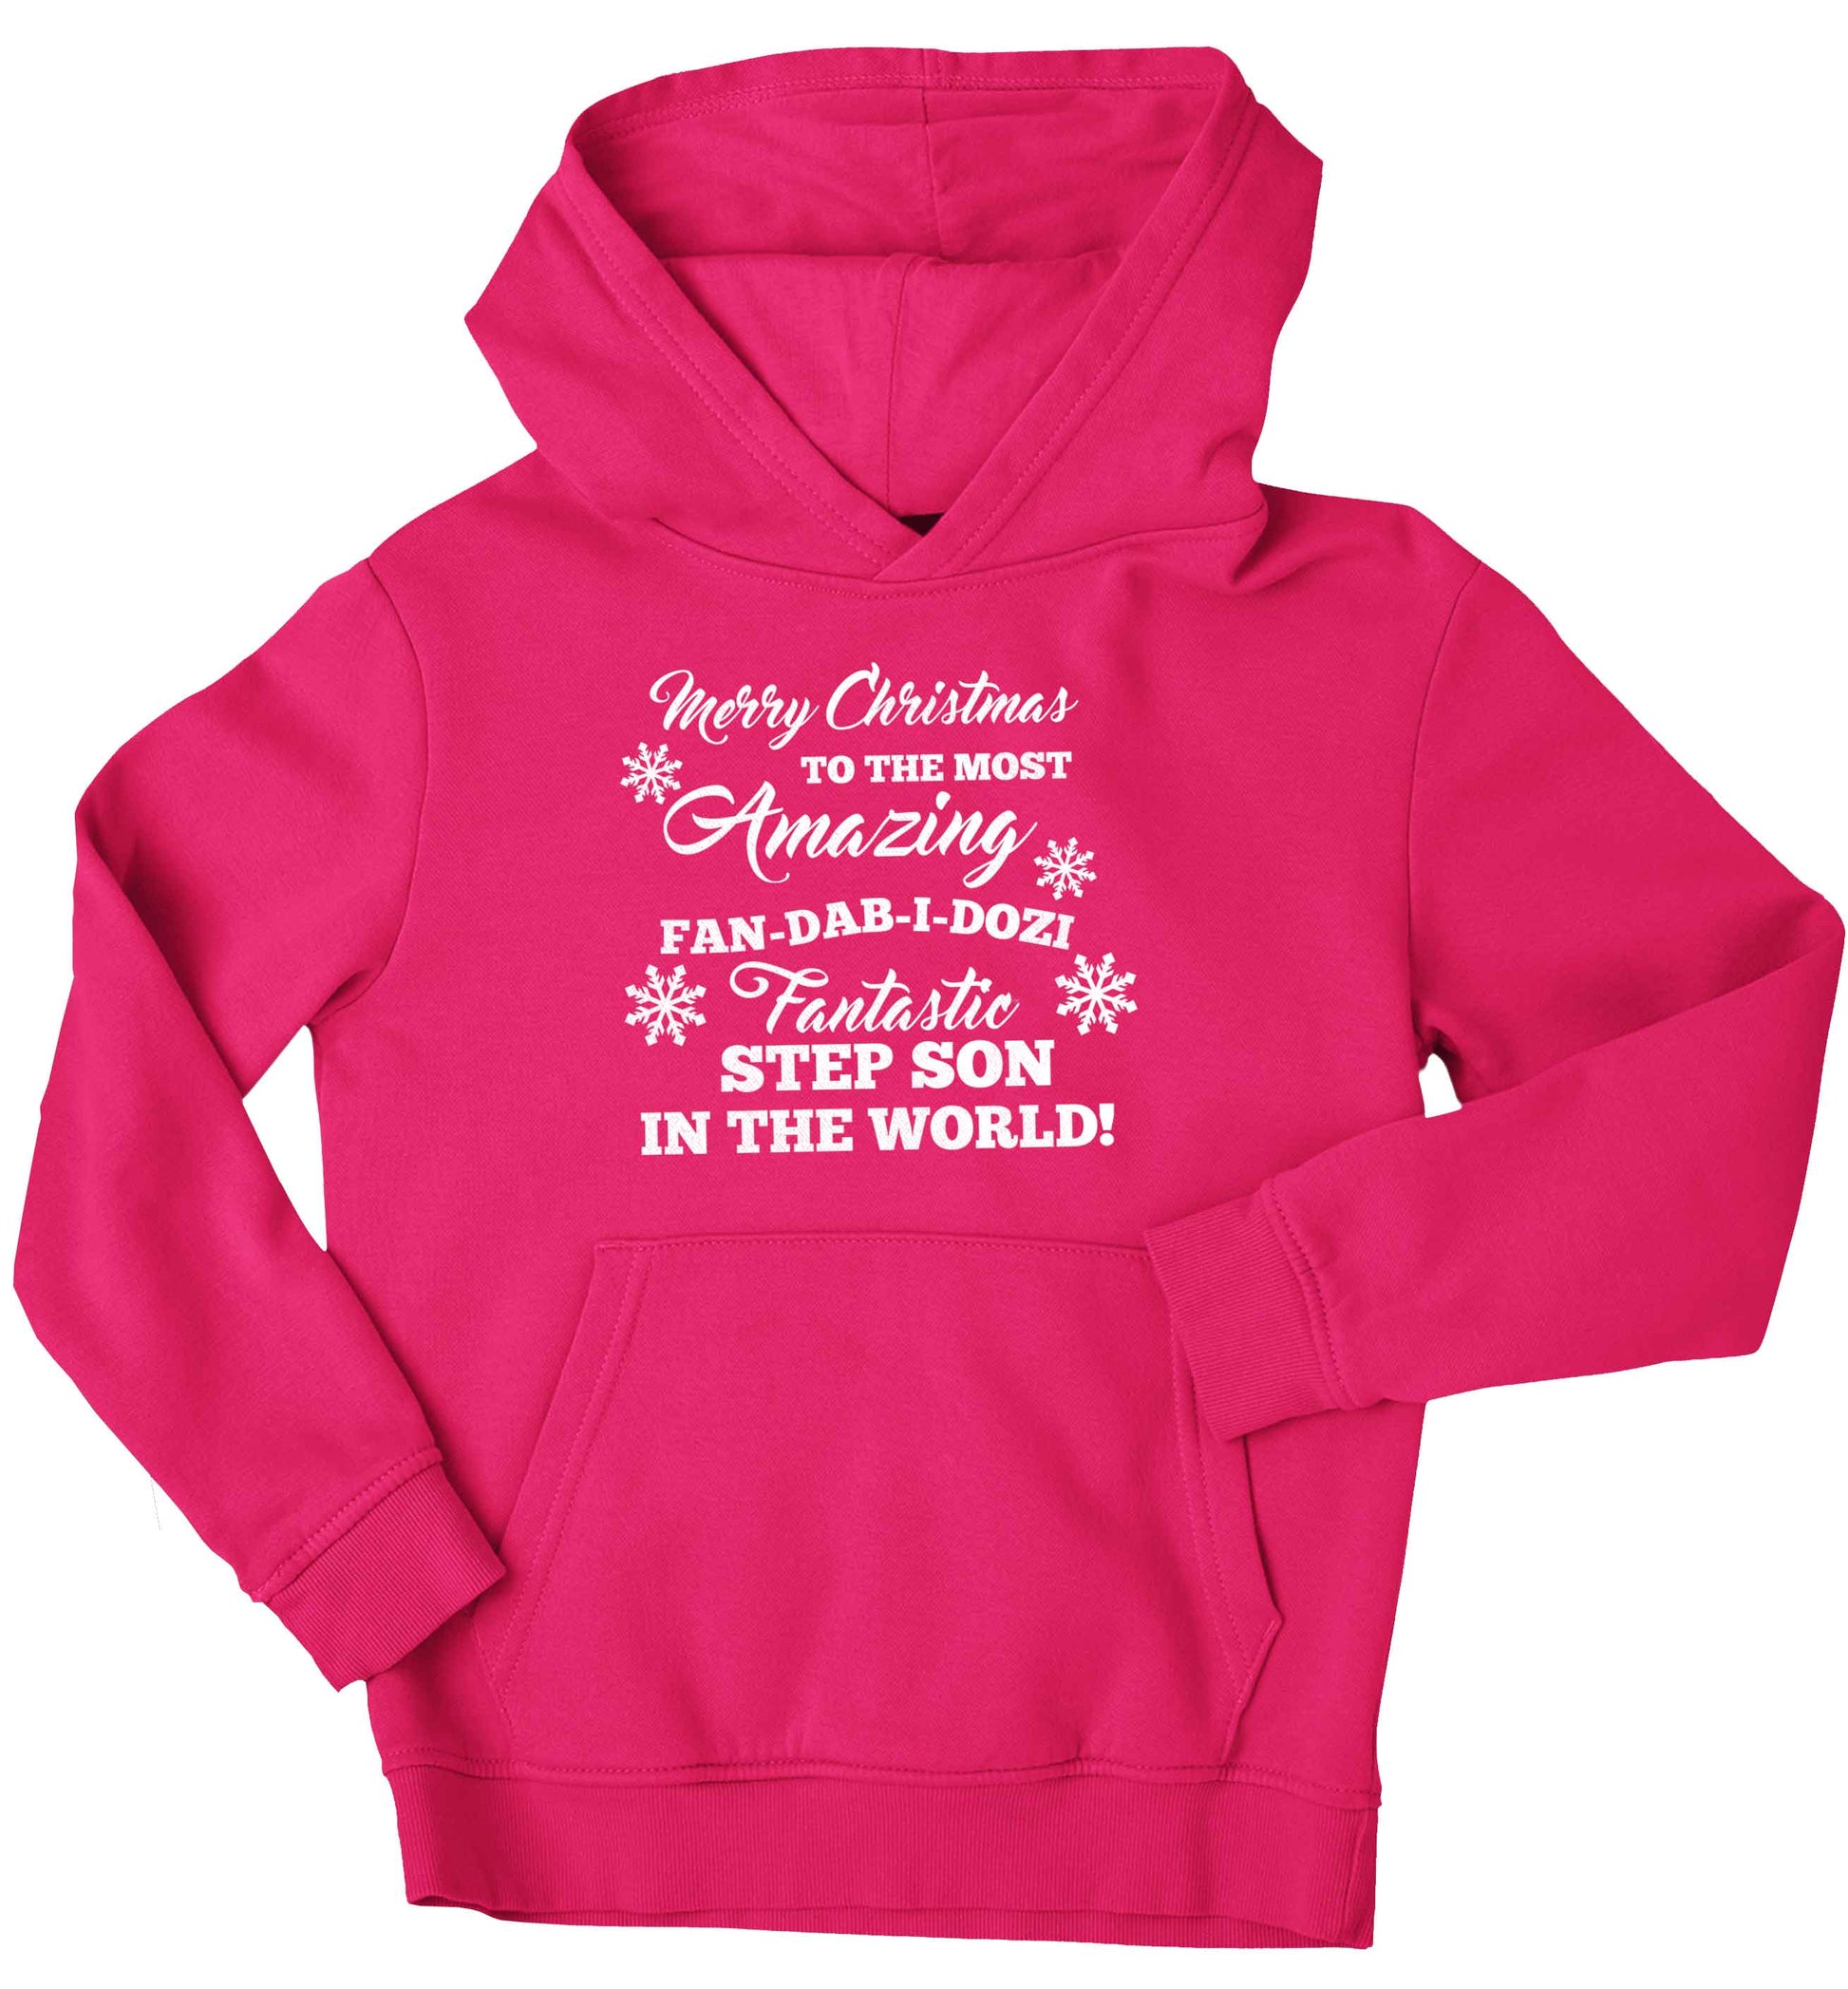 Merry Christmas to the most amazing fan-dab-i-dozi fantasic Step Son in the world children's pink hoodie 12-13 Years